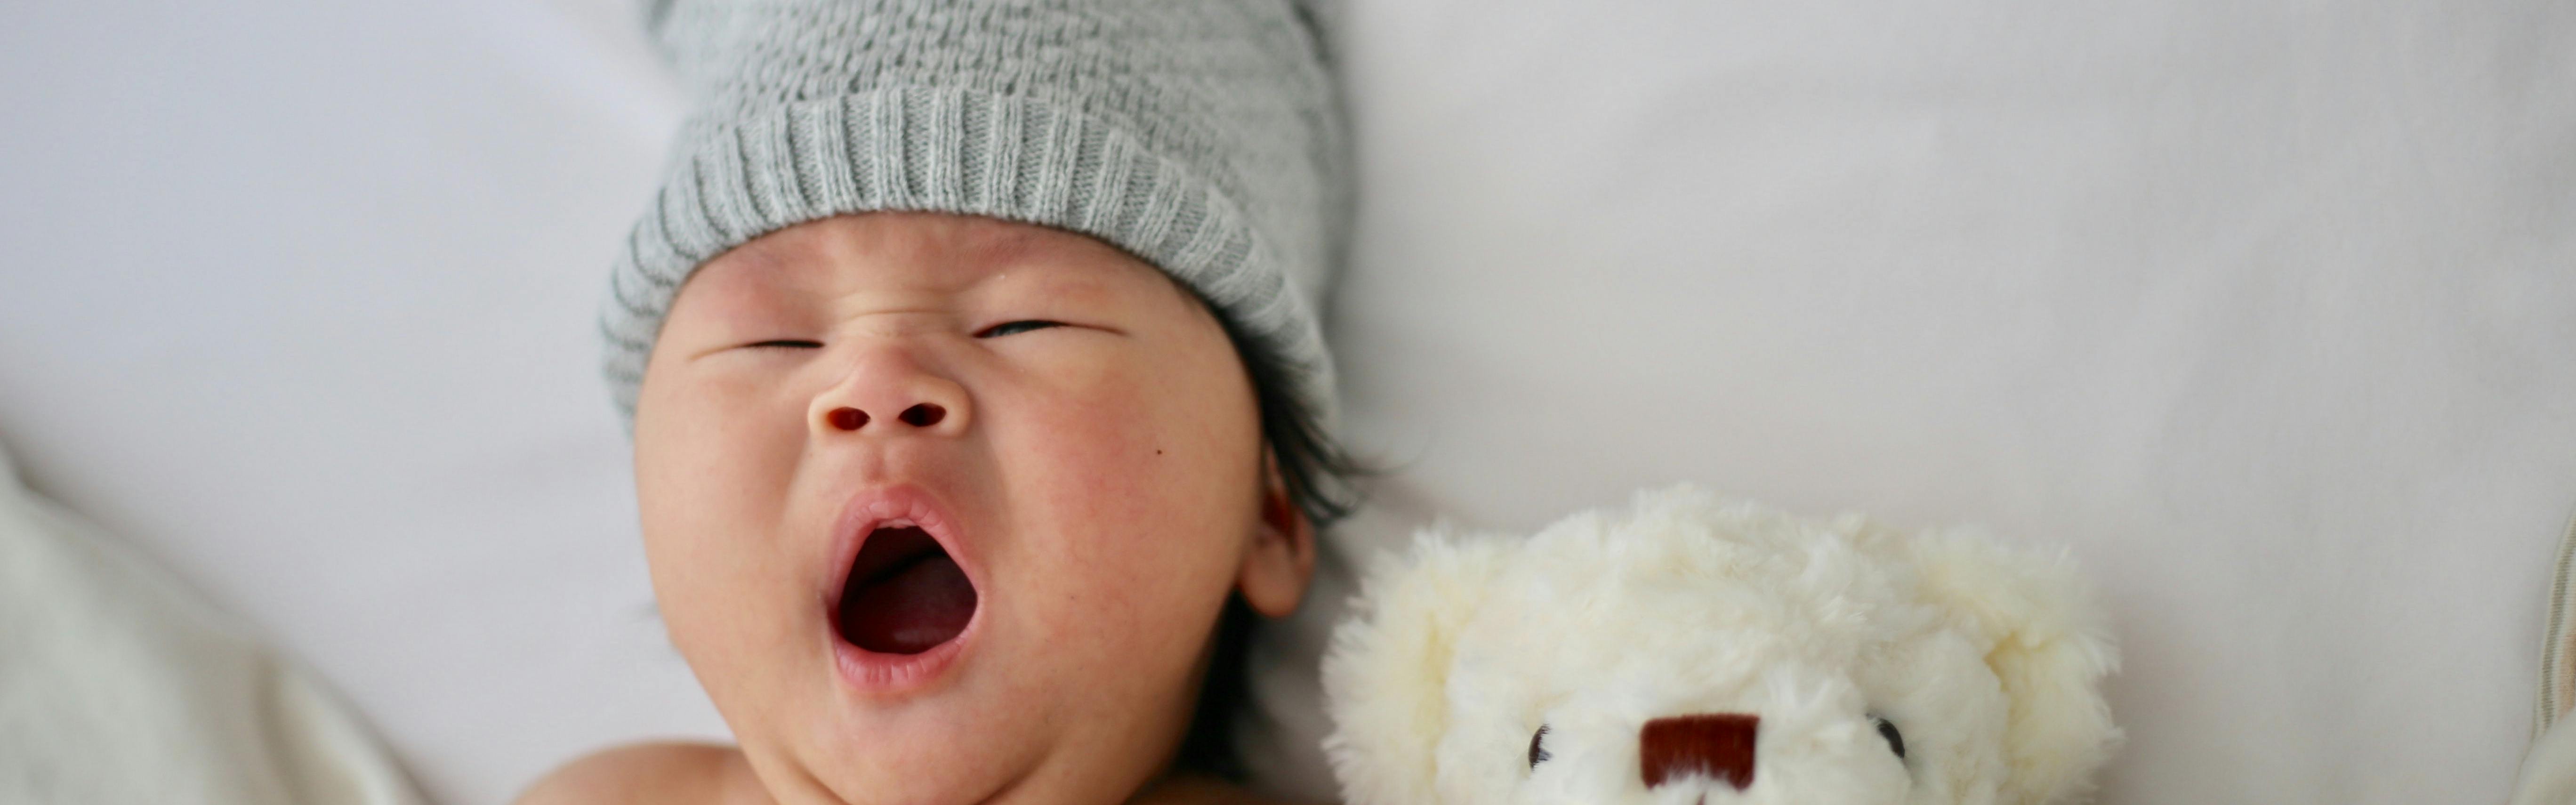 A baby wearing a hat takes a big yawn. His teddy bear is next to him.